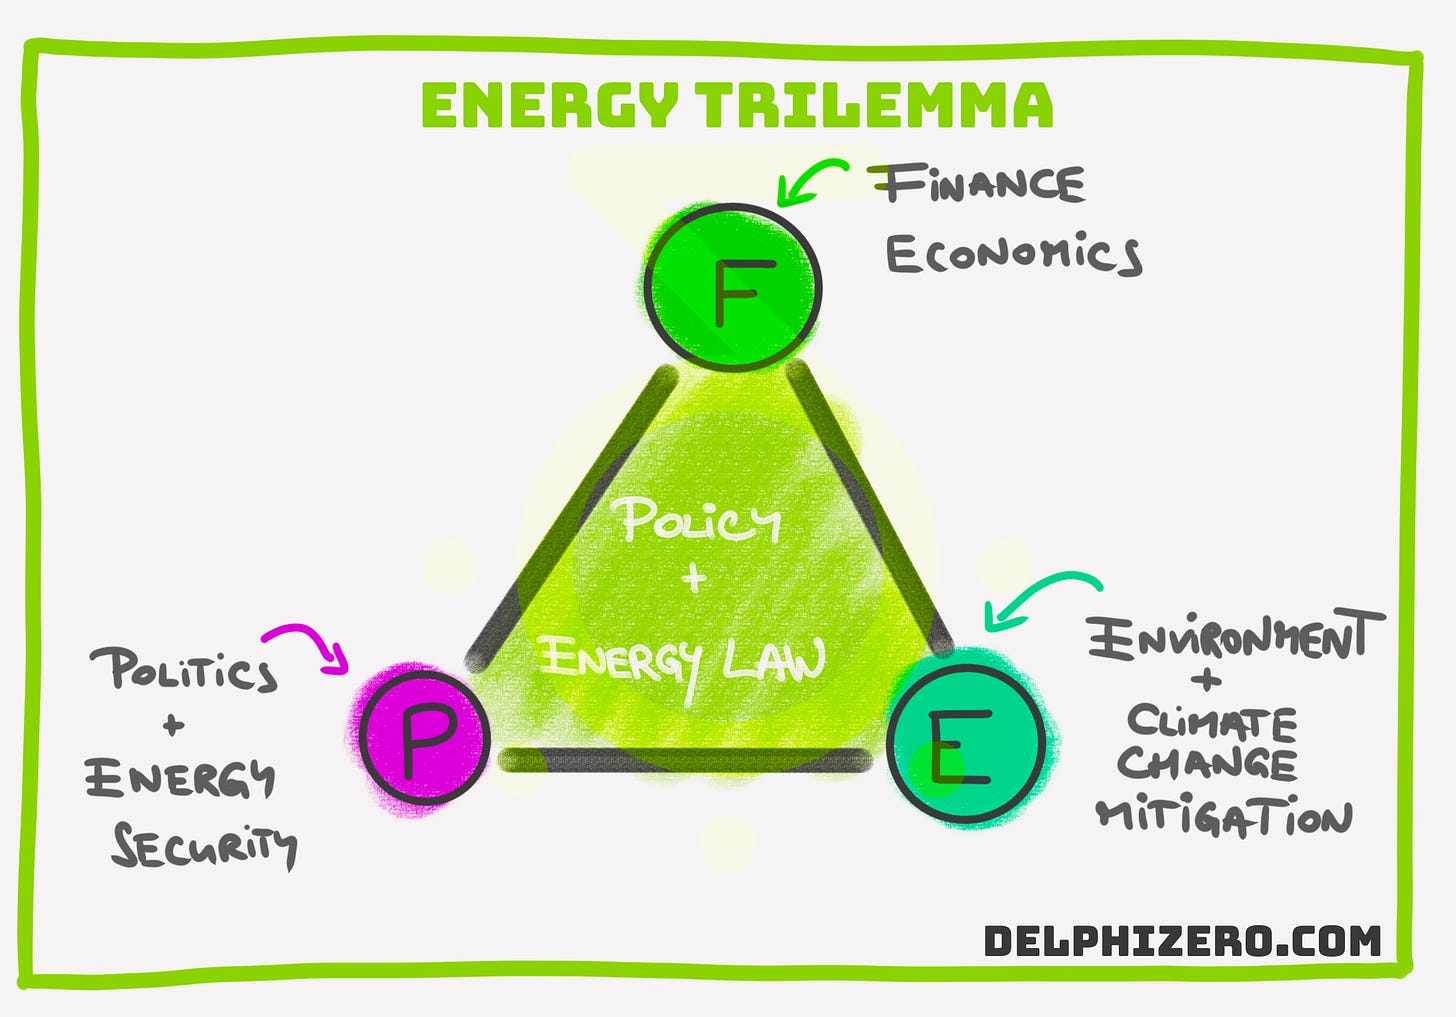 The Energy Trilemma illustrates the relationship between (F) finance, (P) politics, and (E) the environment.